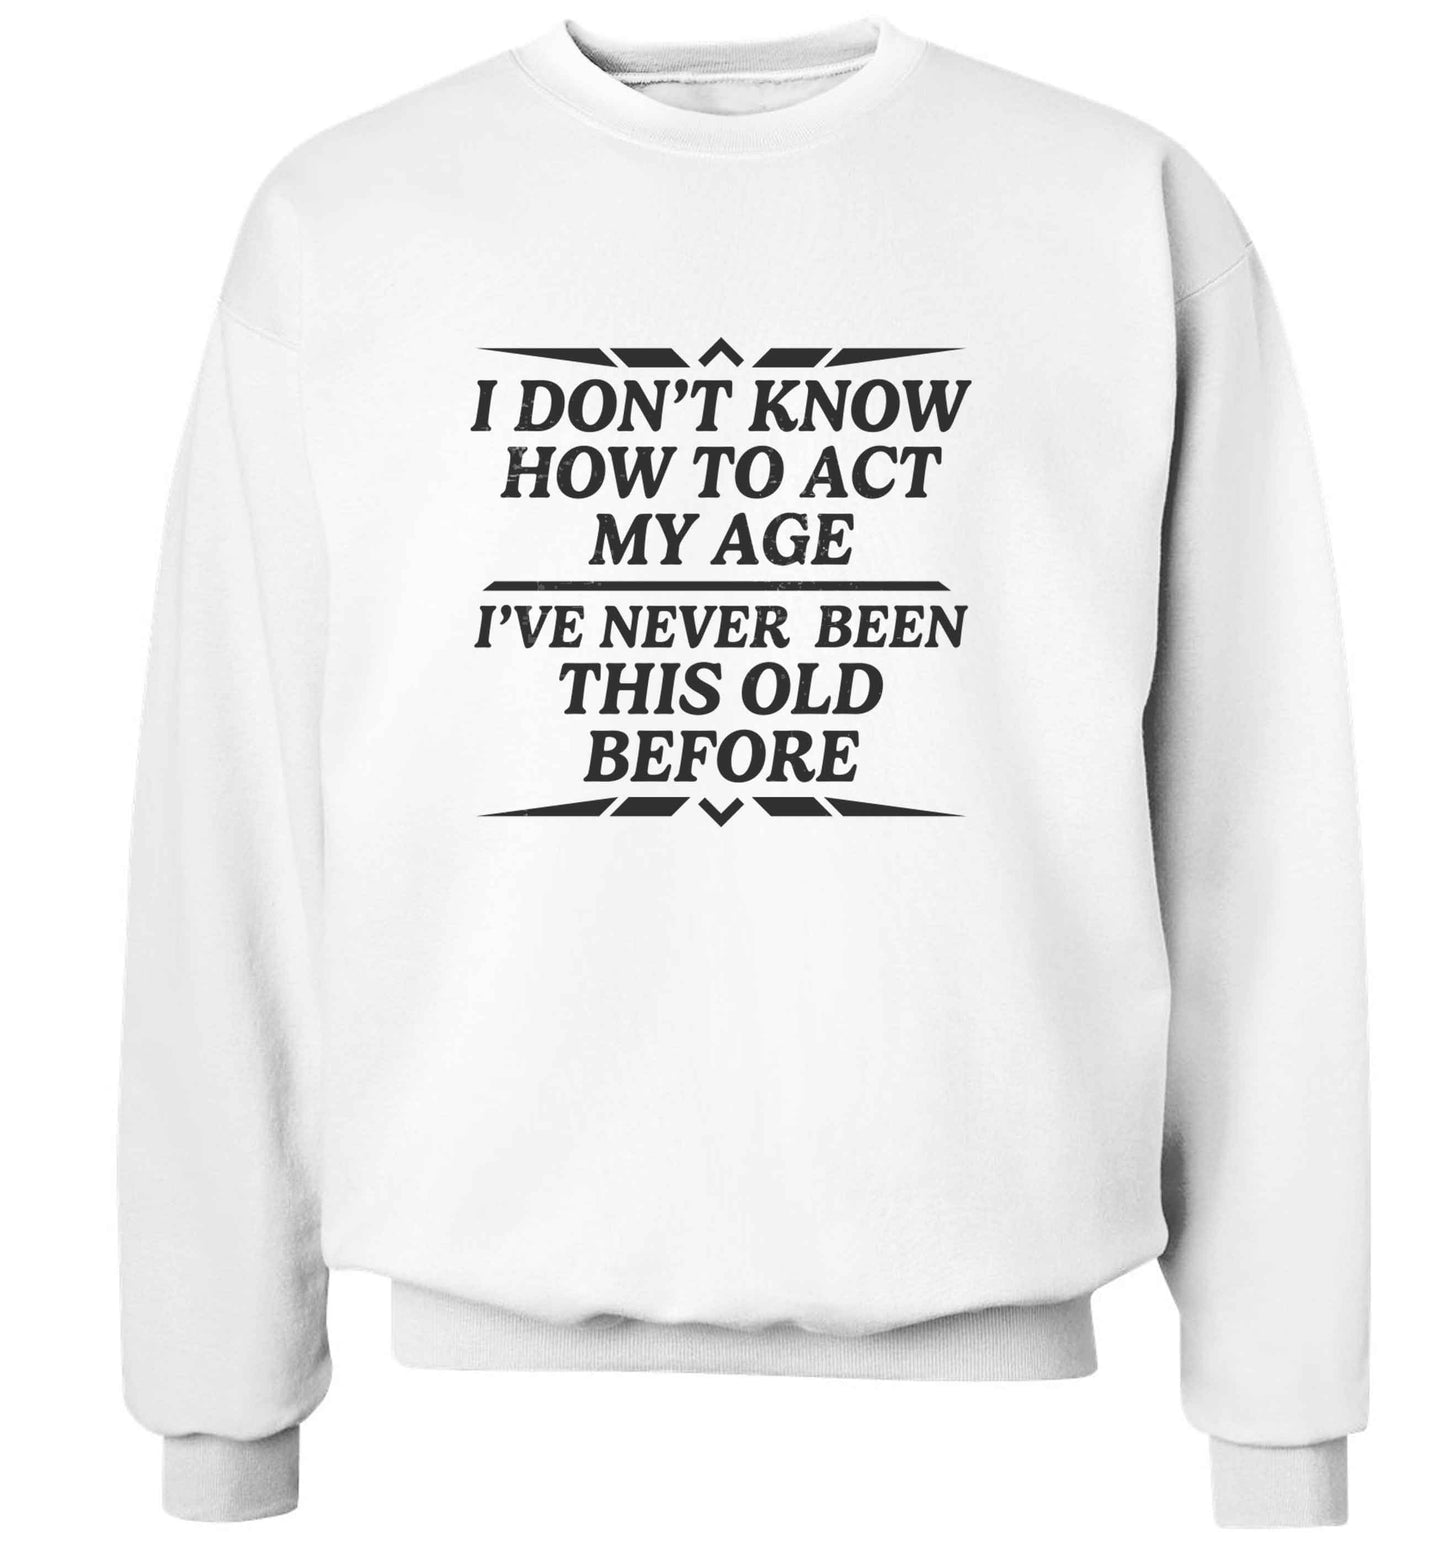 I don't know how to act my age I've never been this old before adult's unisex white sweater 2XL